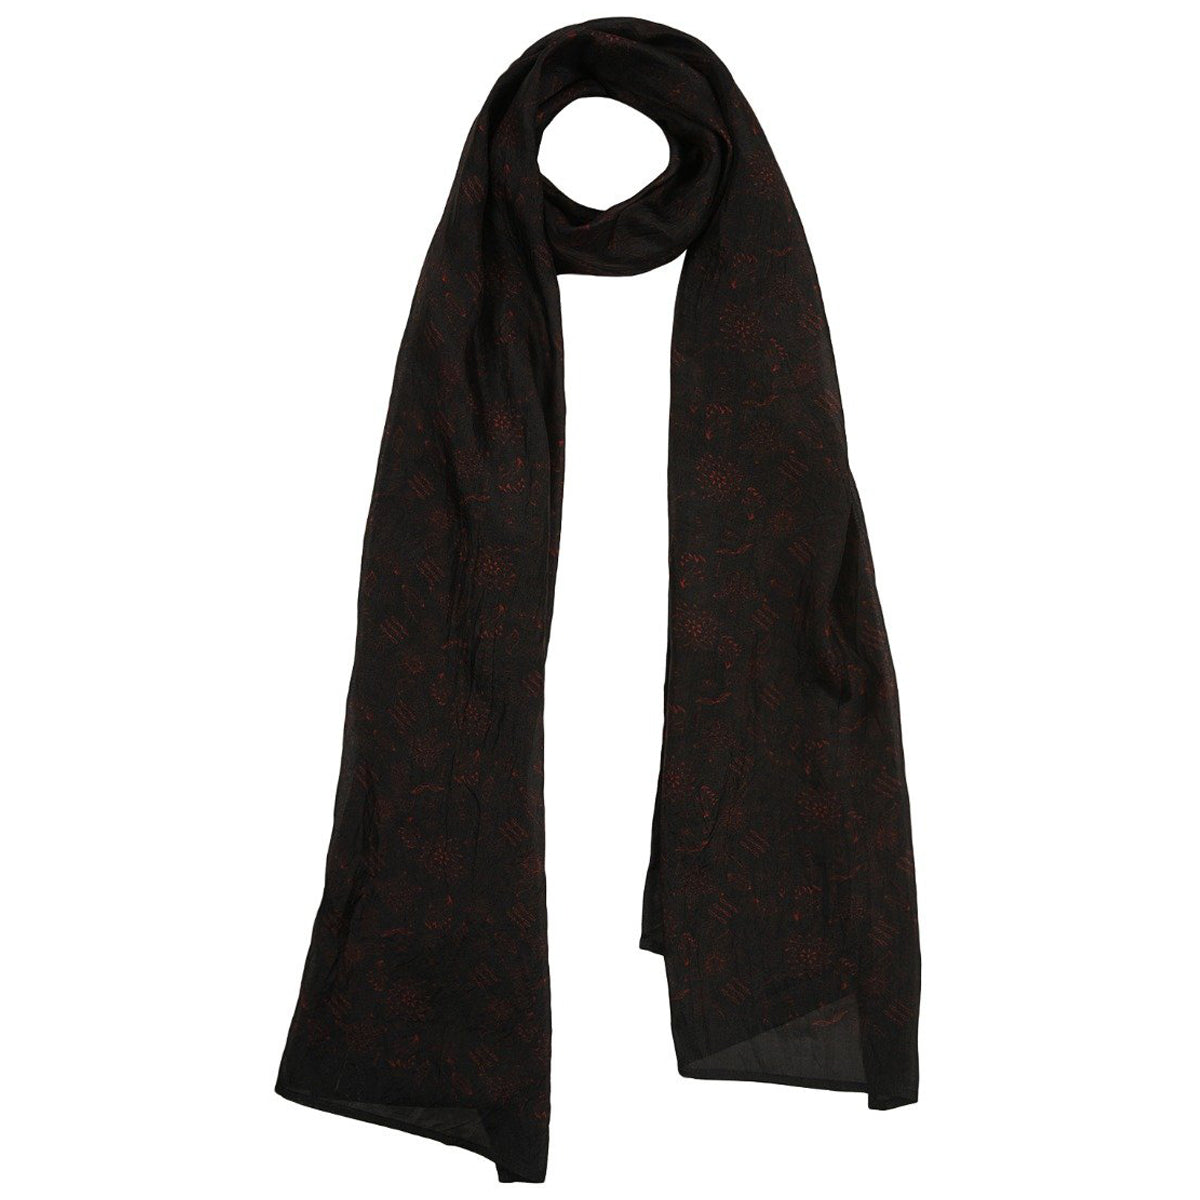 Printed Black & Red Silk Stole for Women